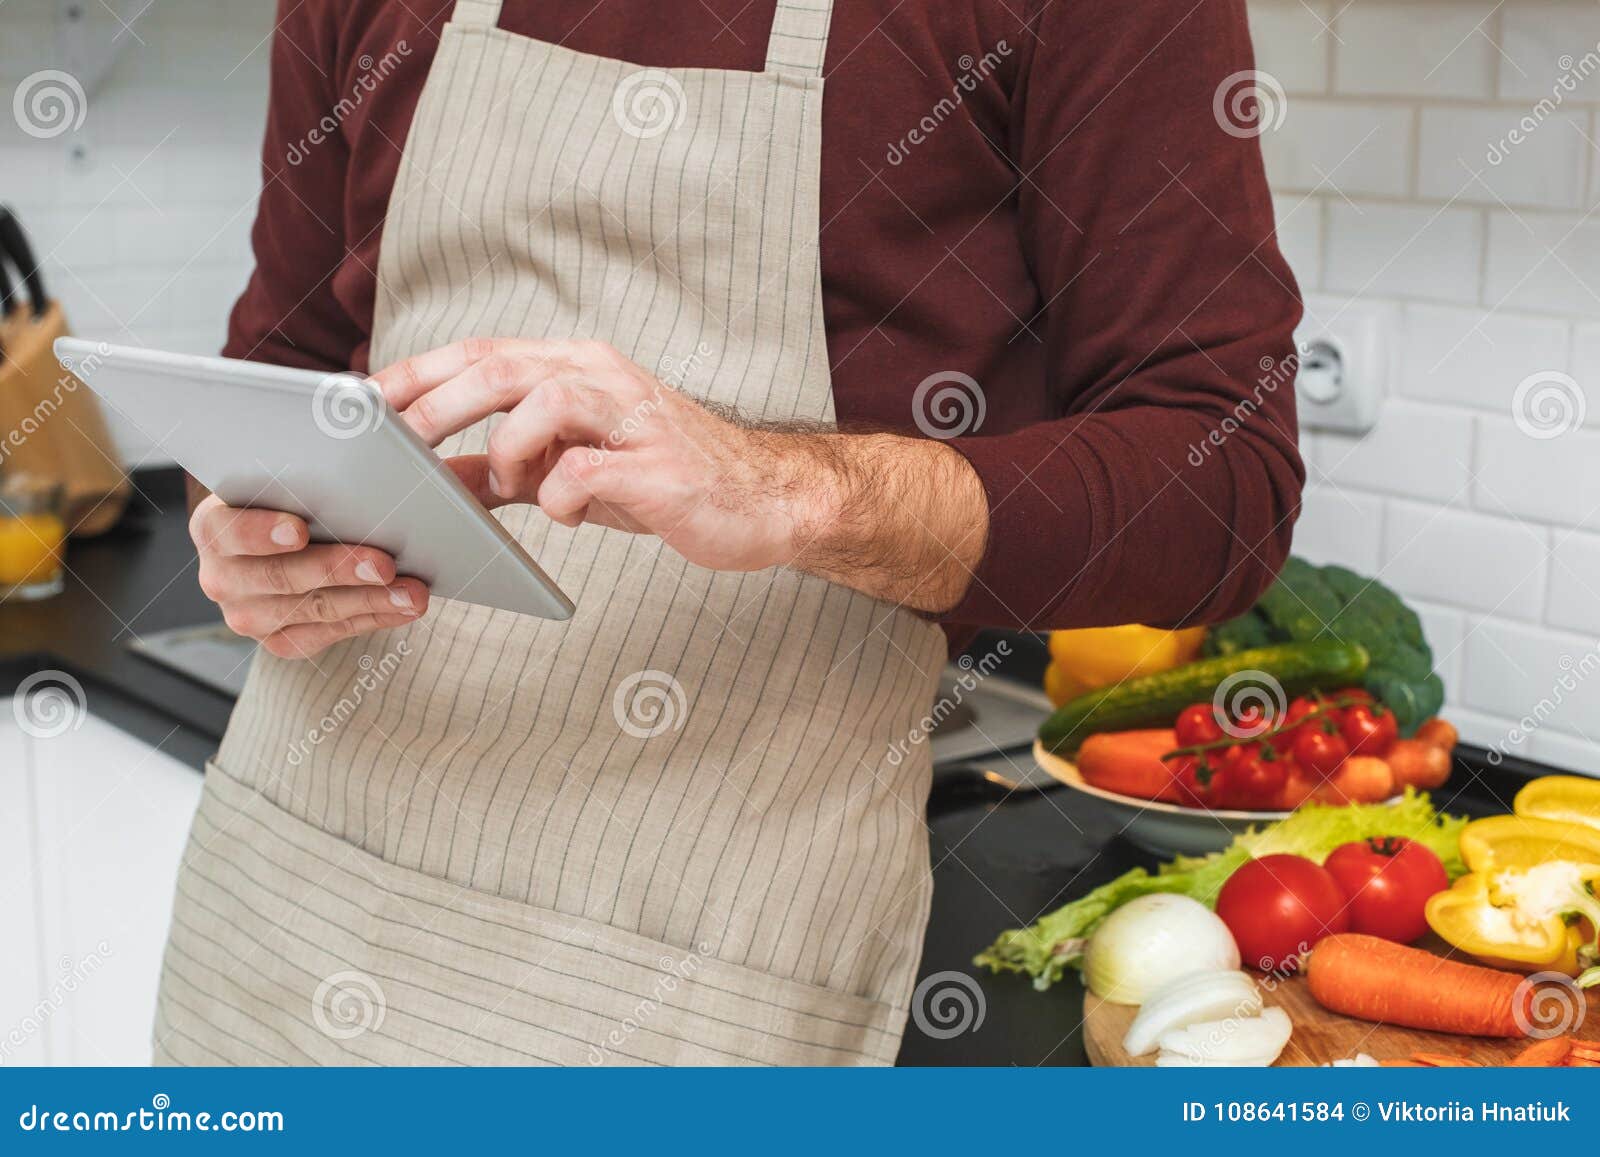 Young Man Cooking Romantic Dinner at Home Browsing Digital Tablet Close ...